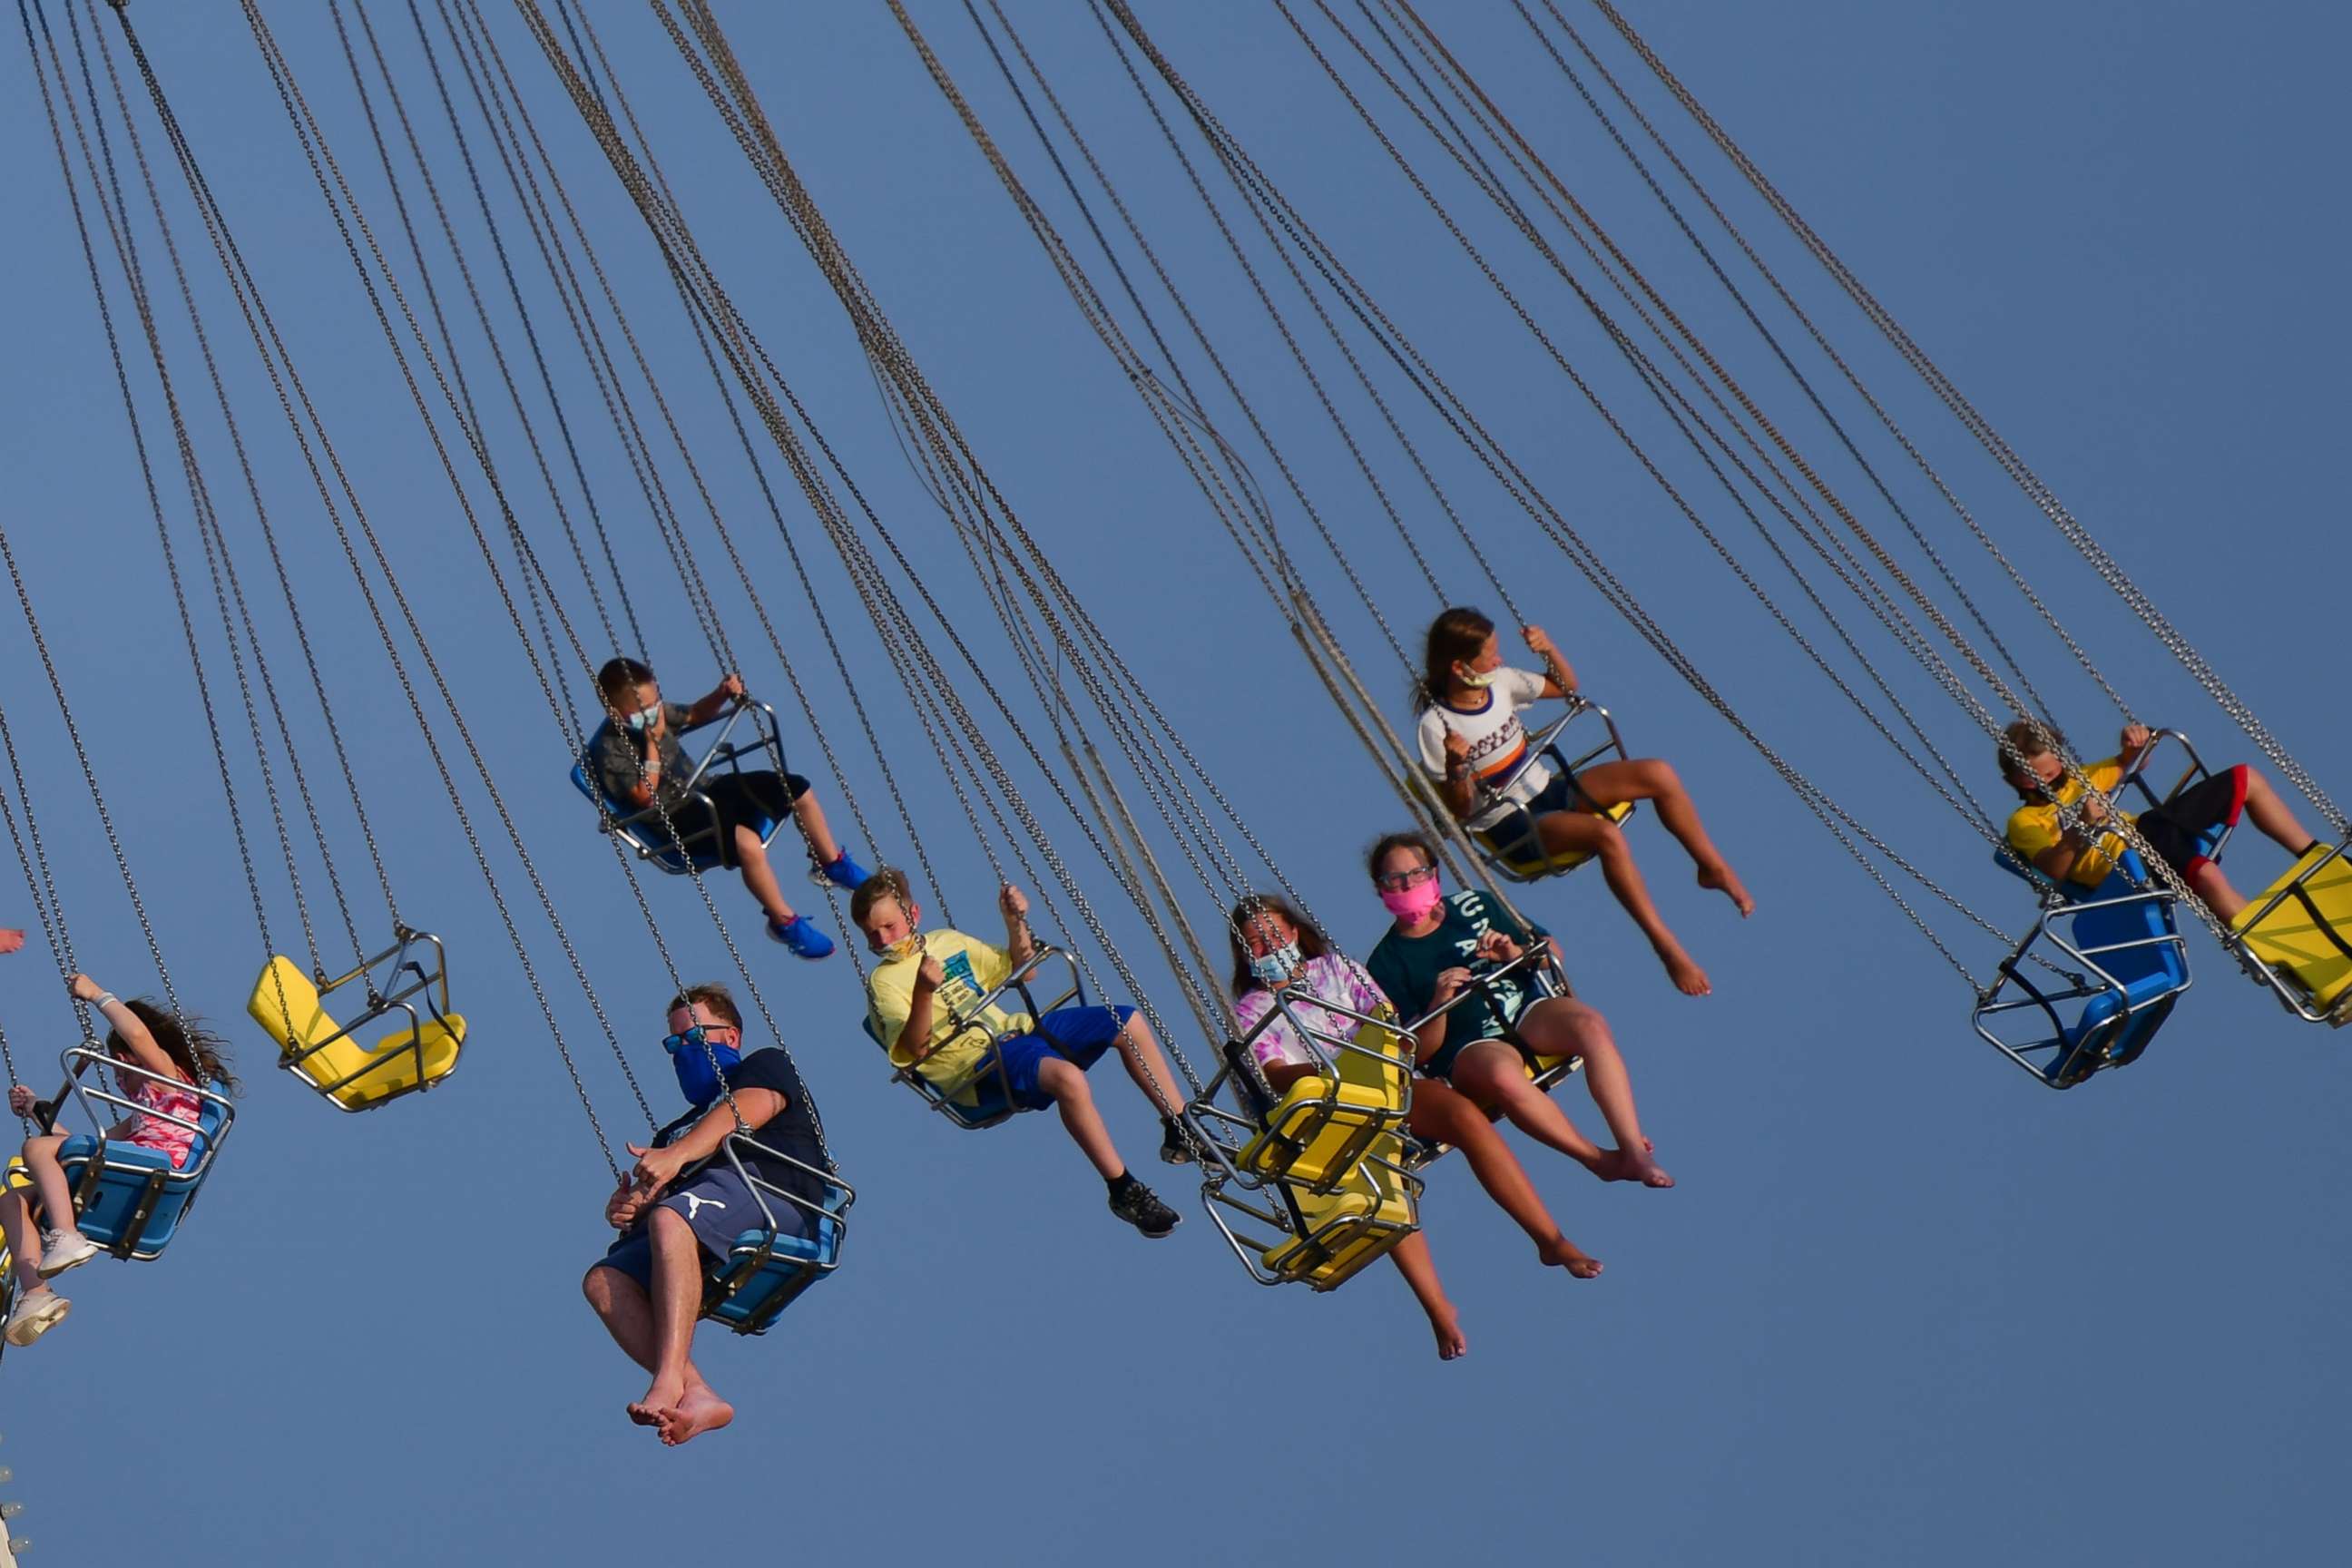 PHOTO: People wearing masks ride attractions at an amusement pier on July 3, 2020, in Wildwood, N.J.